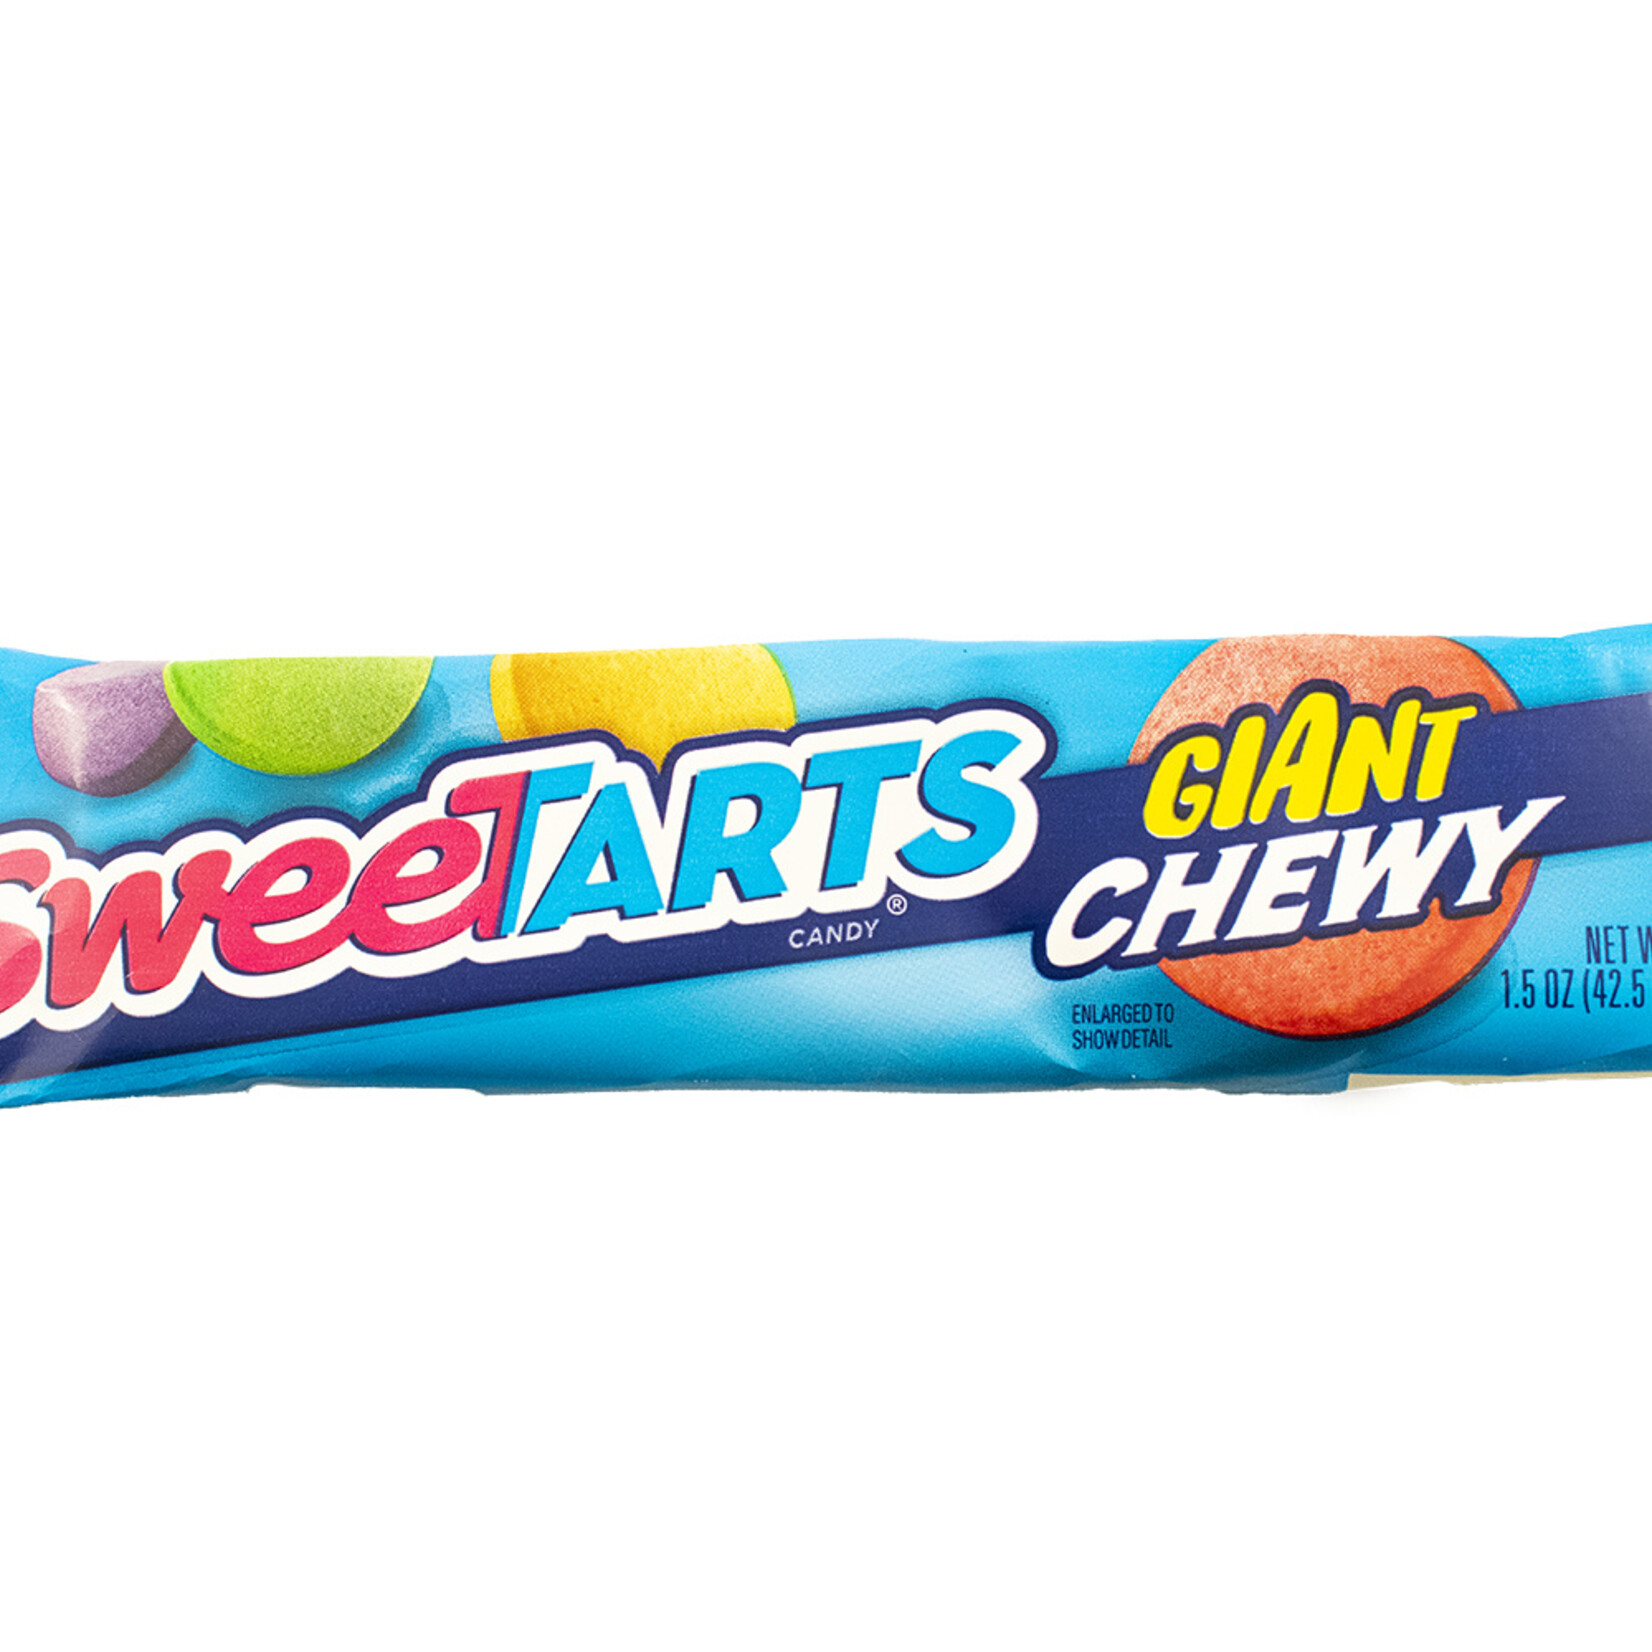 Sweetart Géant Chewy